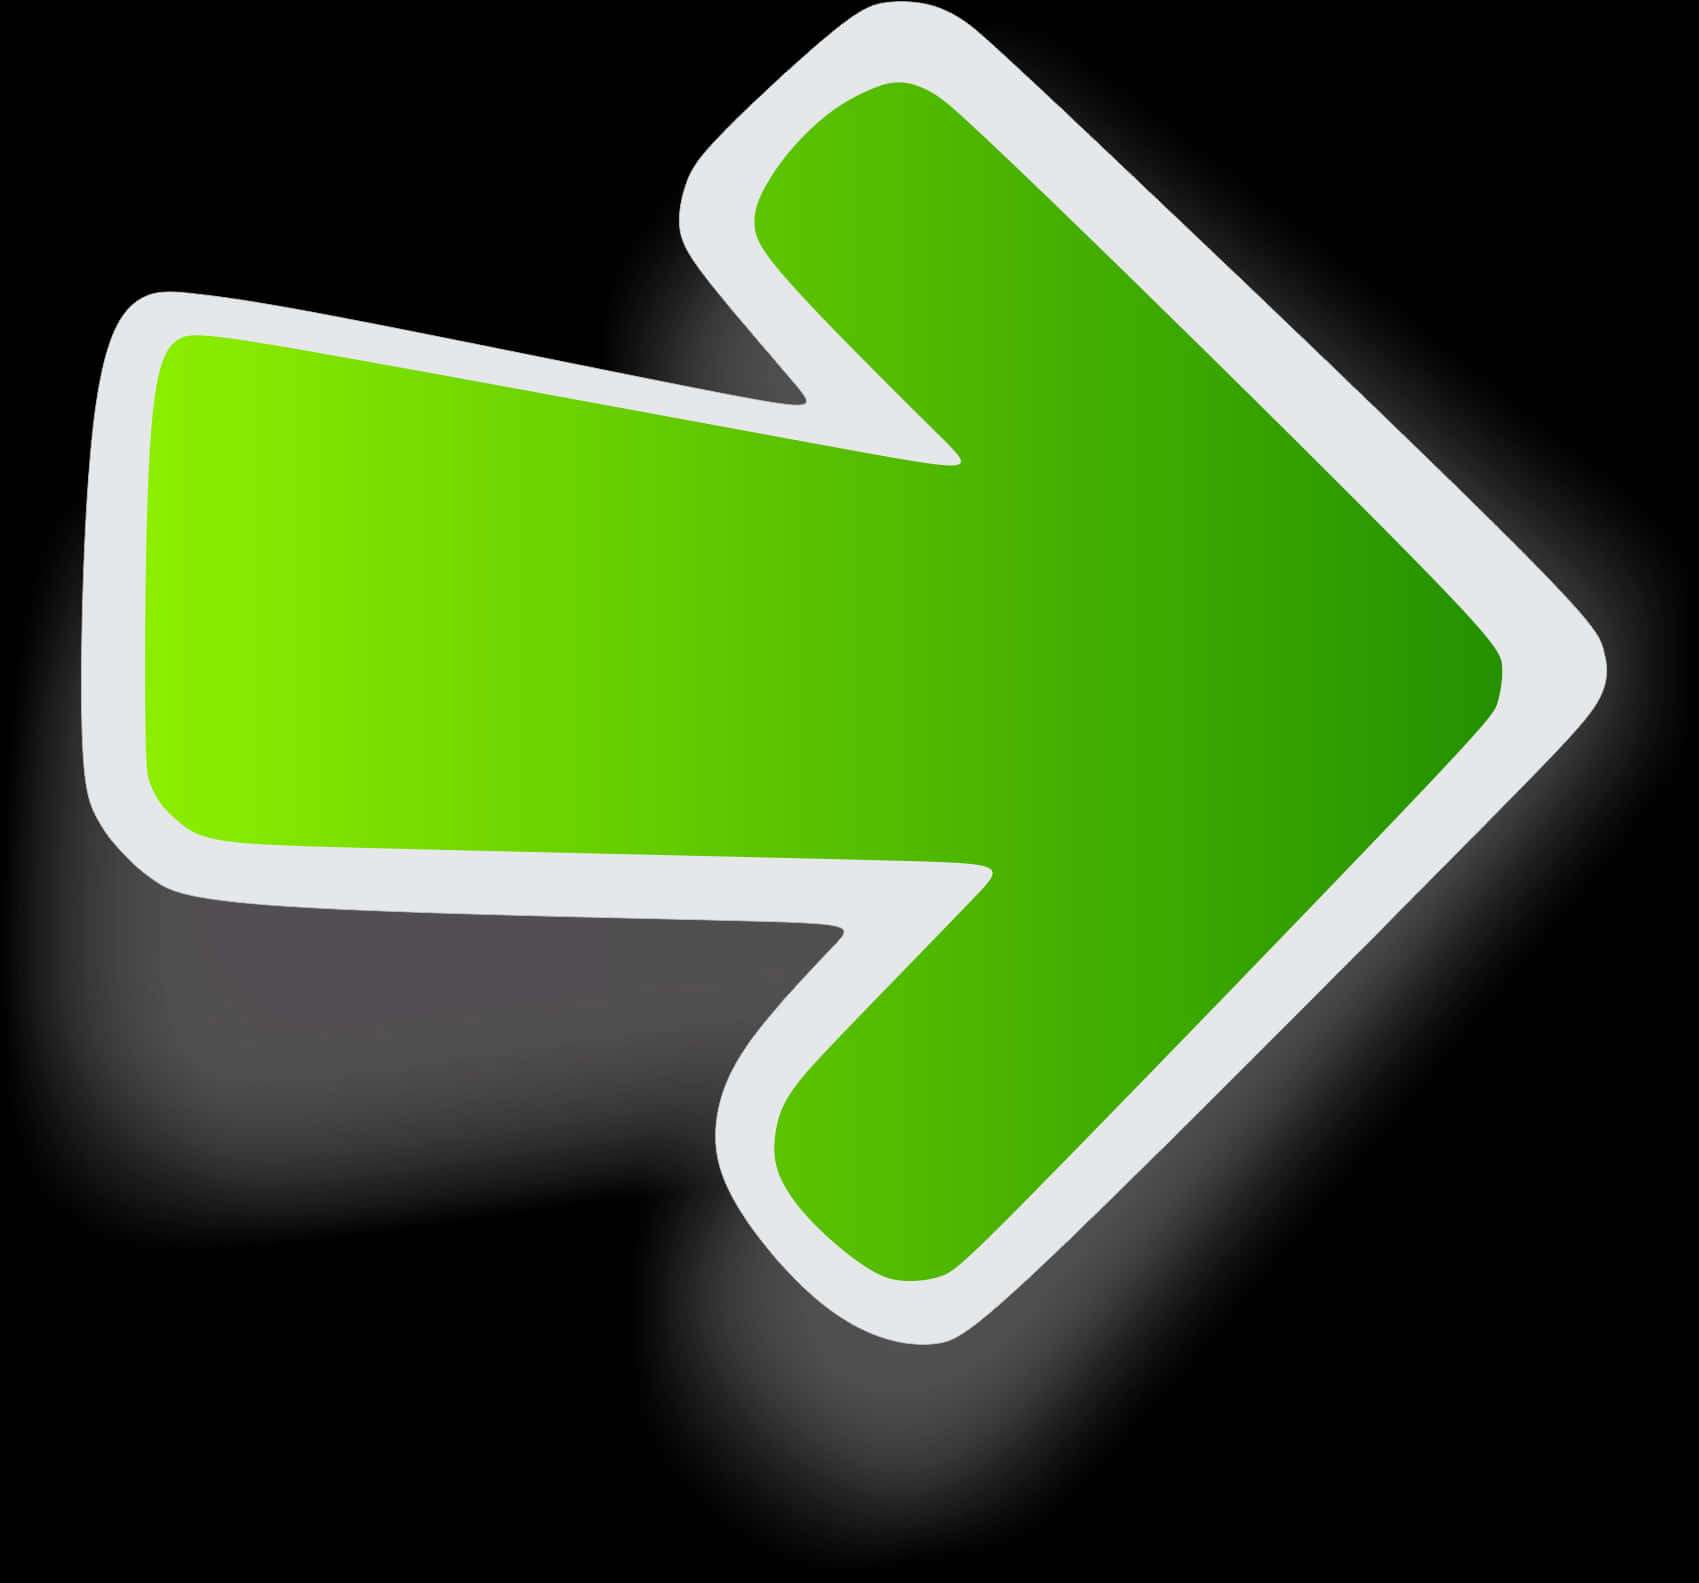 Green Arrow Direction Sign PNG image